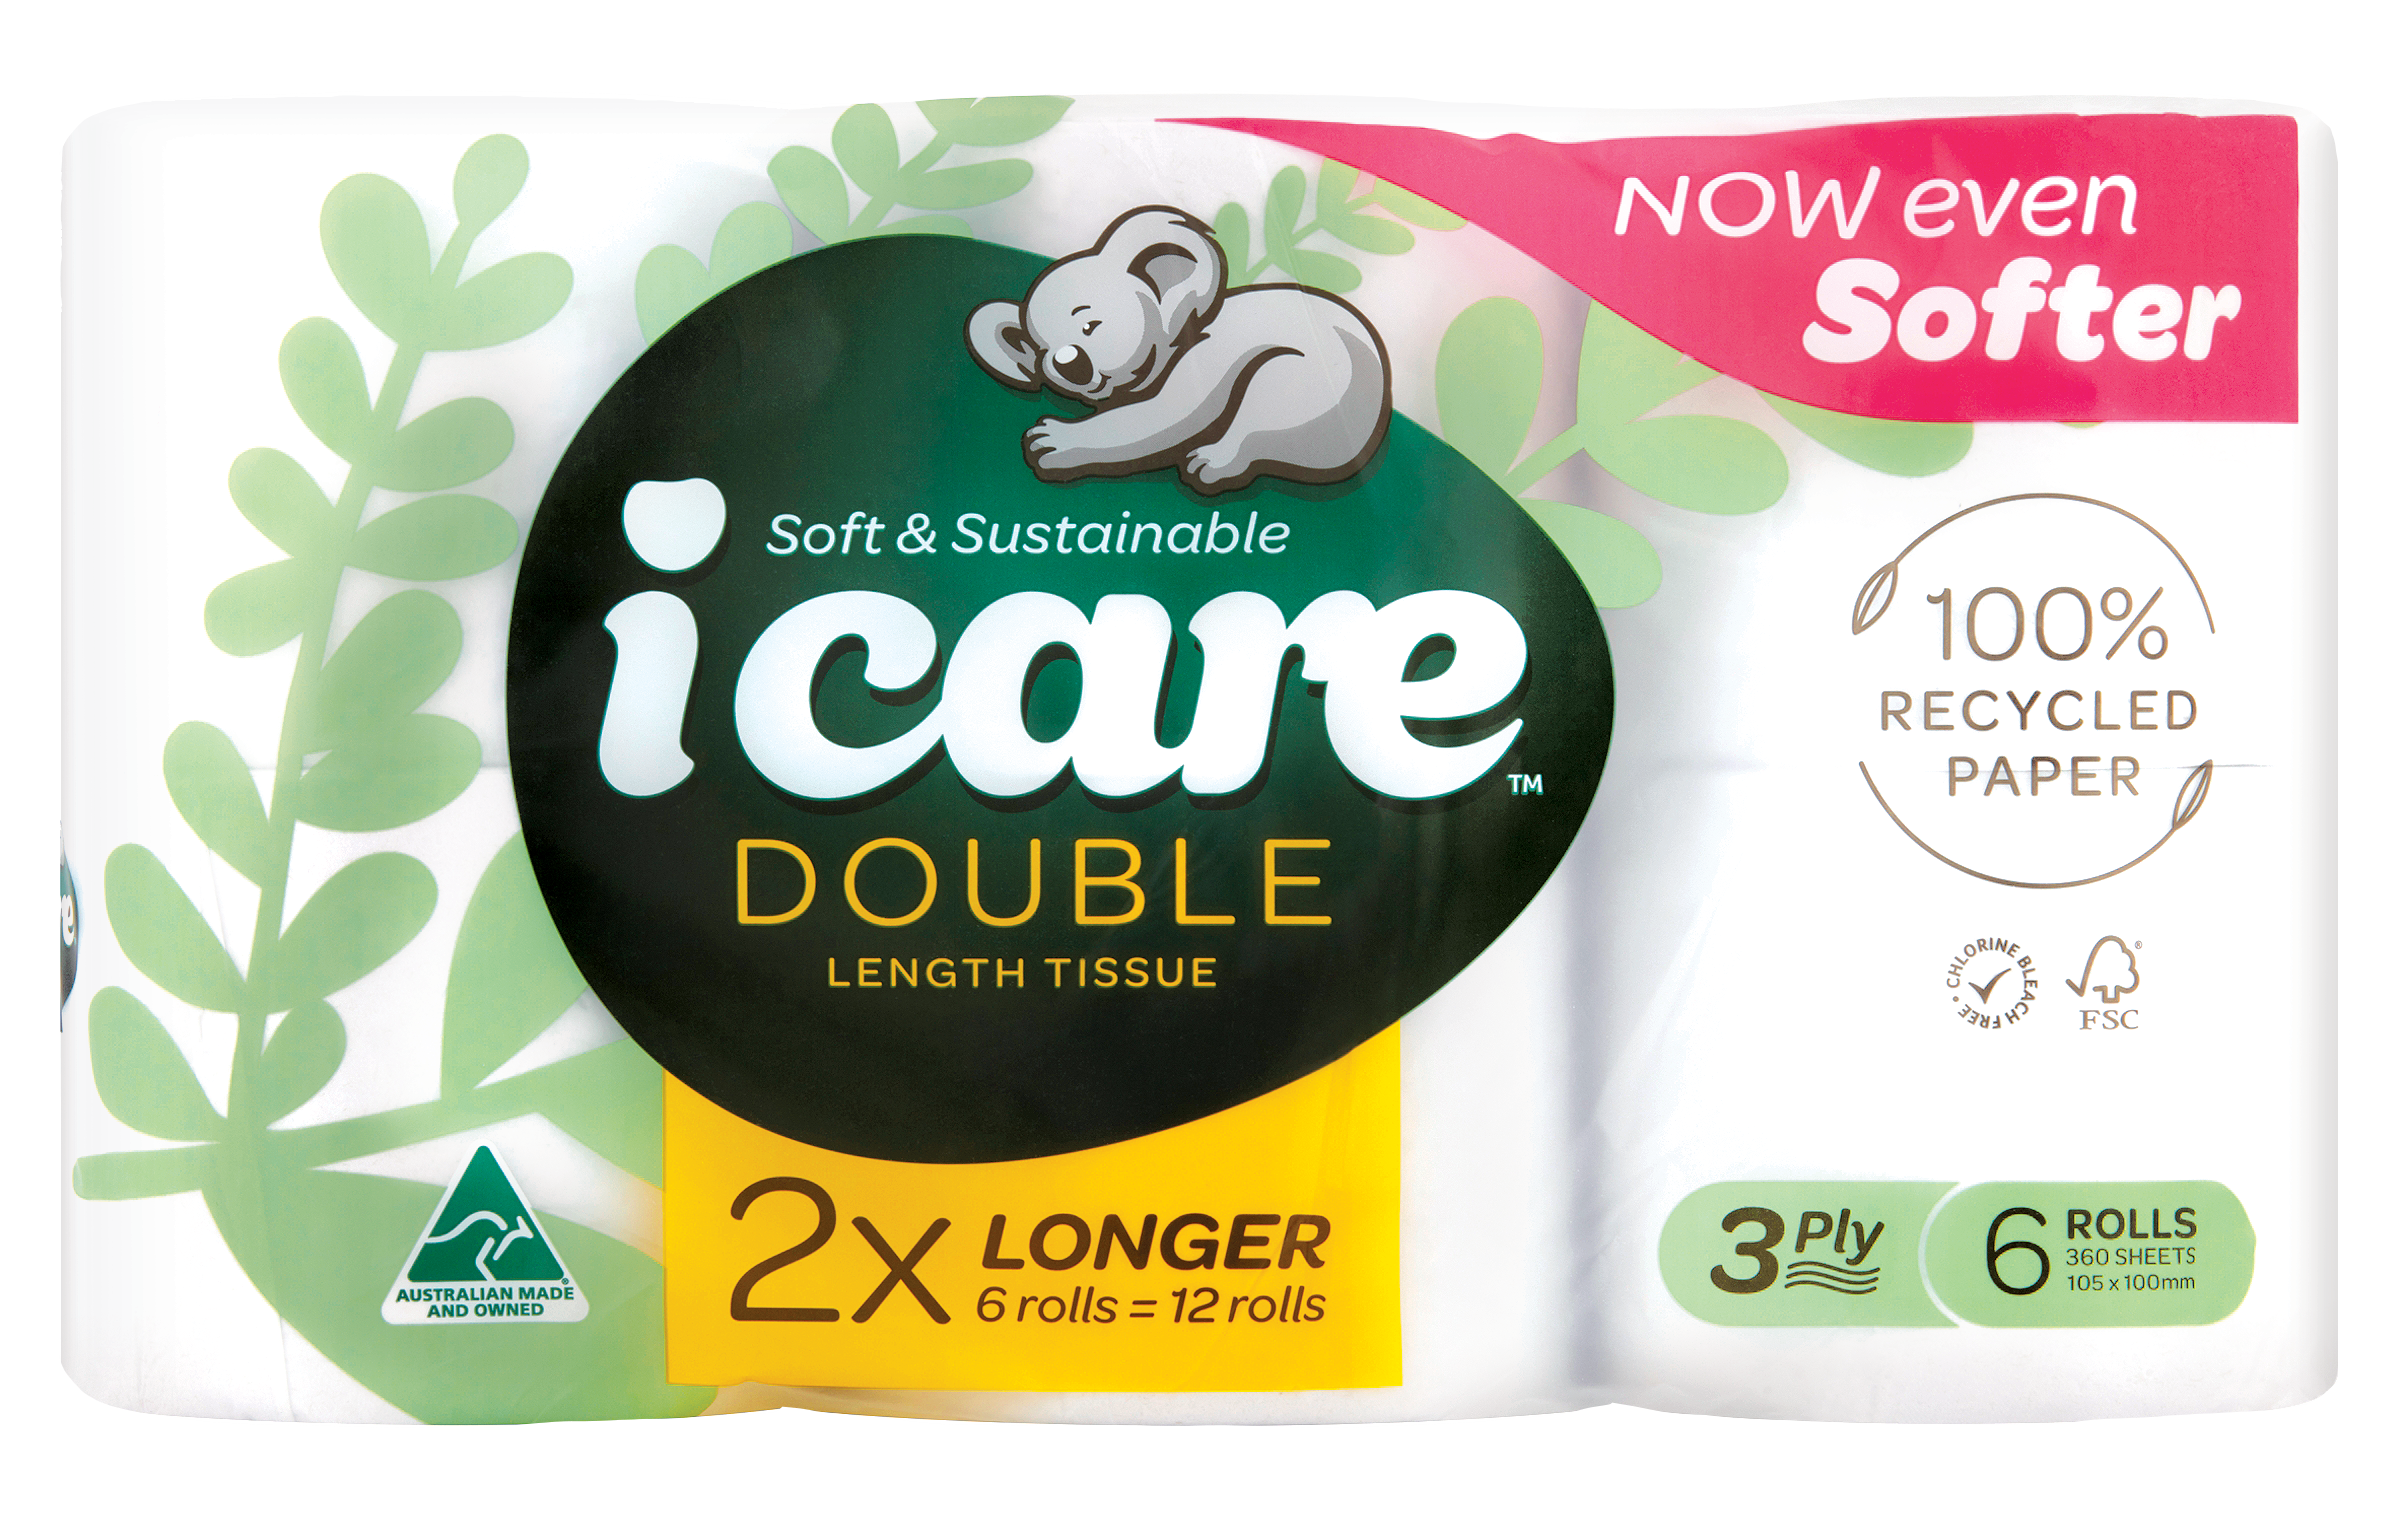 icare toilet paper